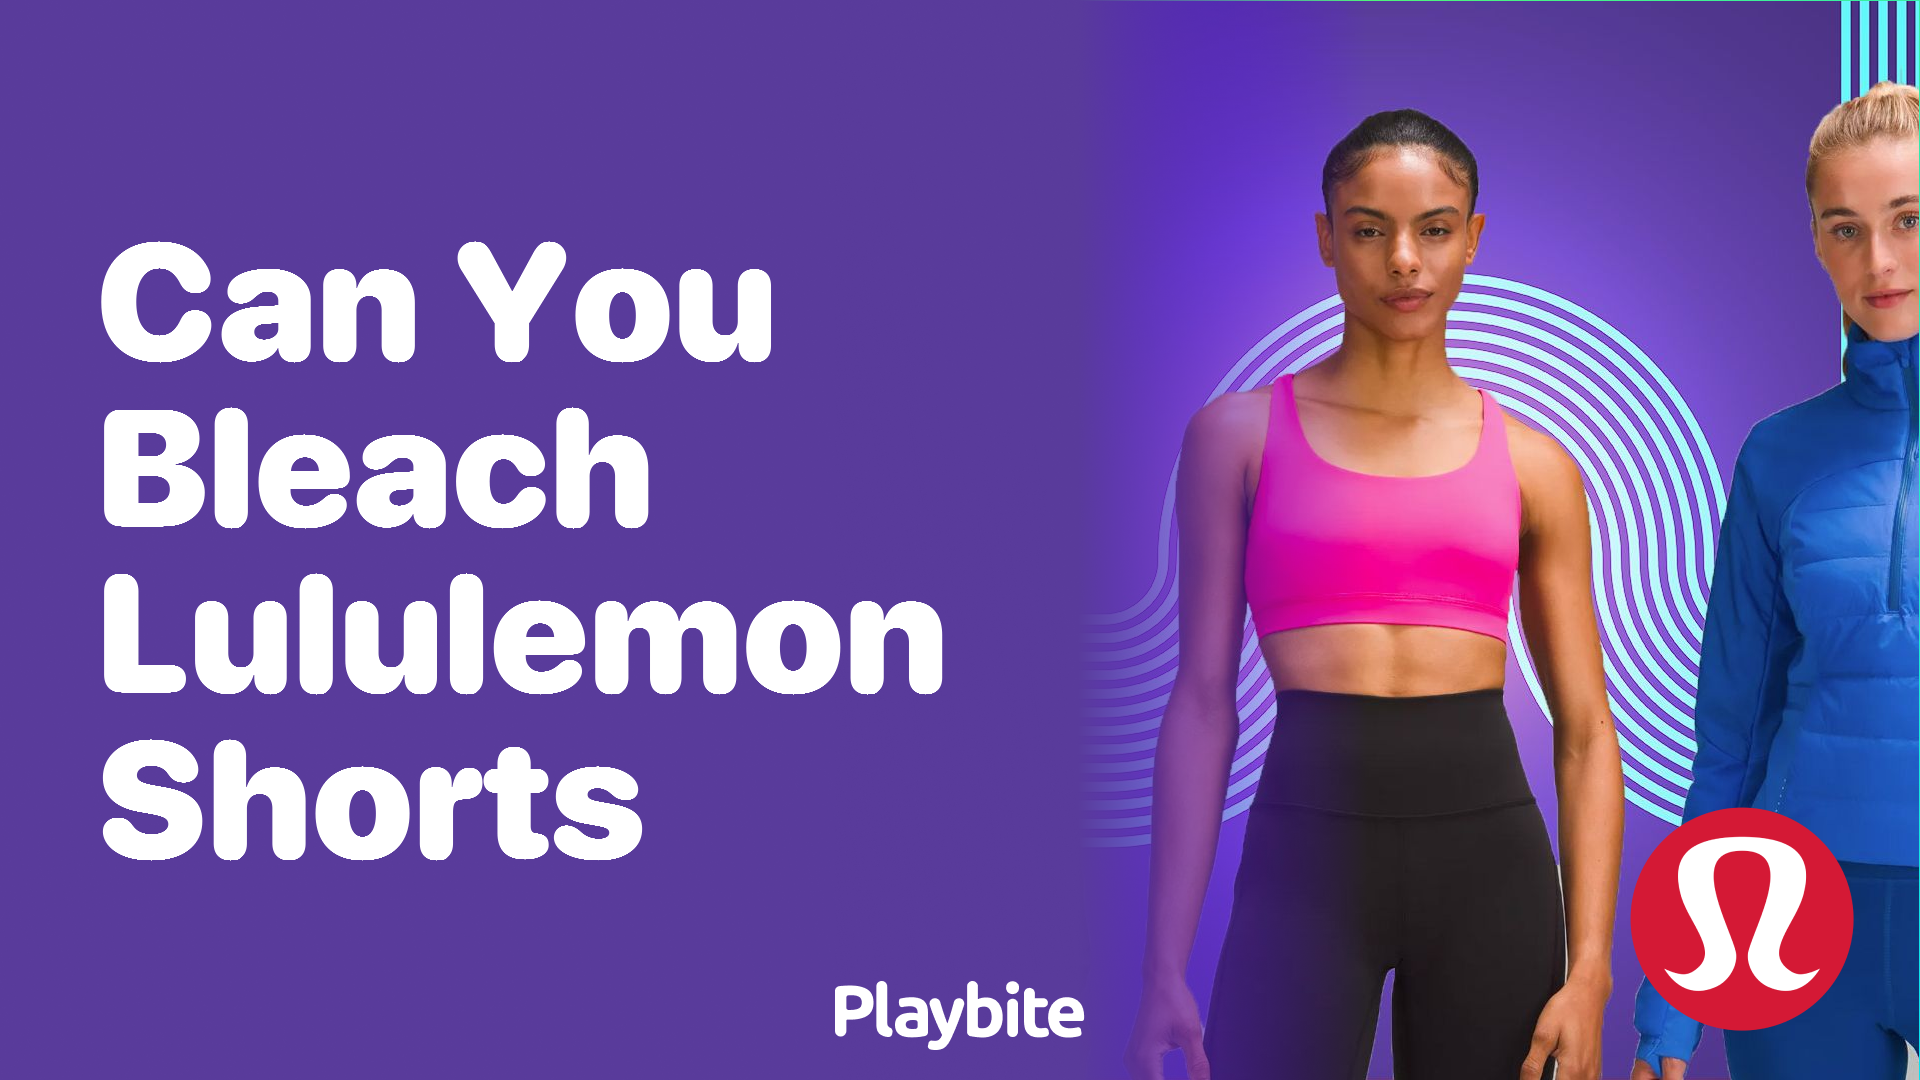 Can You Bleach Lululemon Shorts? Here's What to Know - Playbite